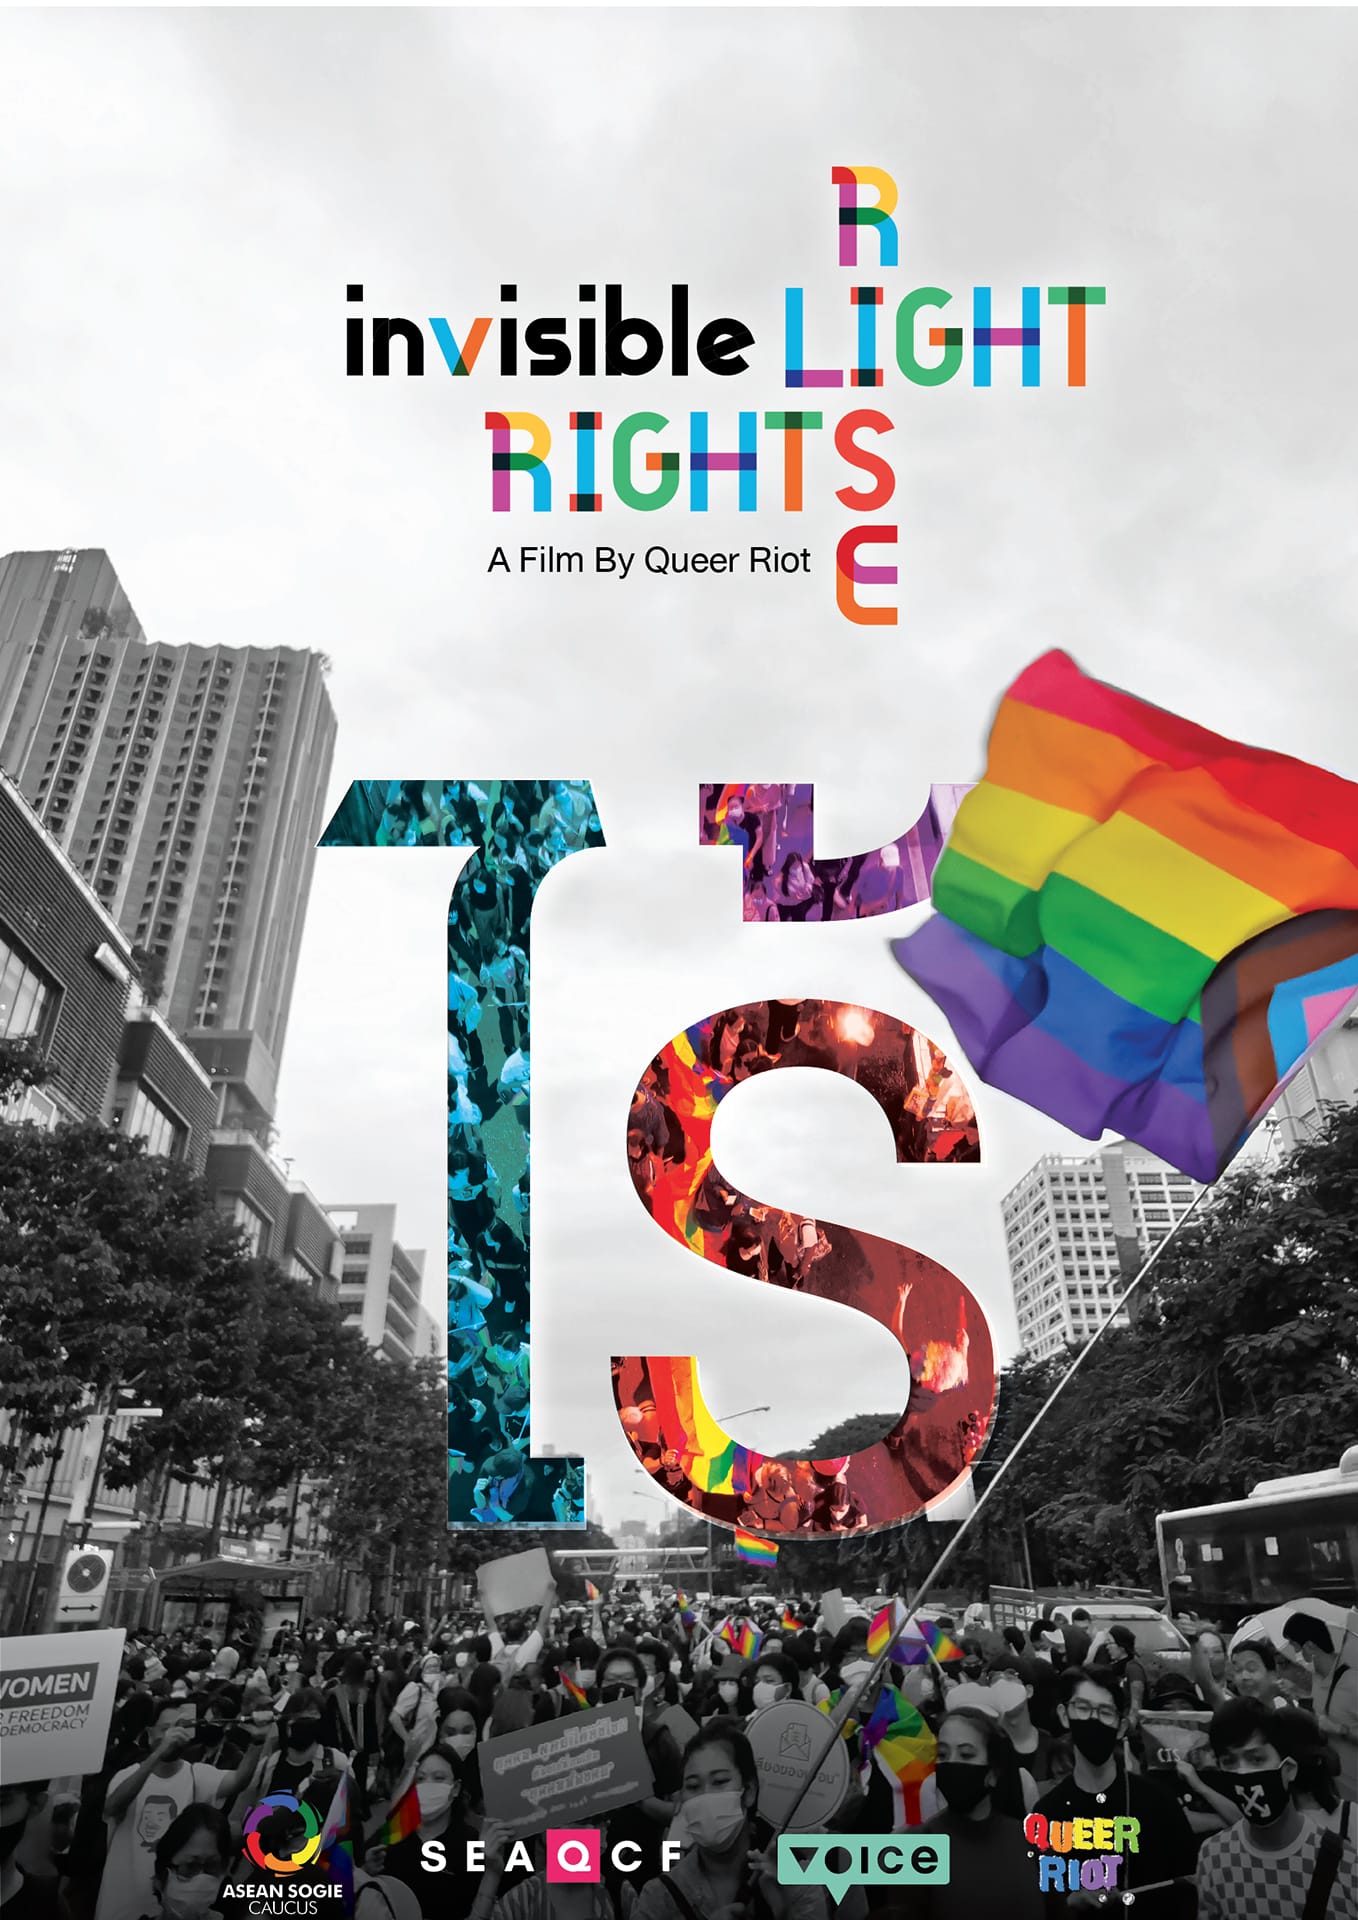 Invisible /light/rise/lights Poster, photo of LGBTIQ people joining a pro-democracy rally in thailand